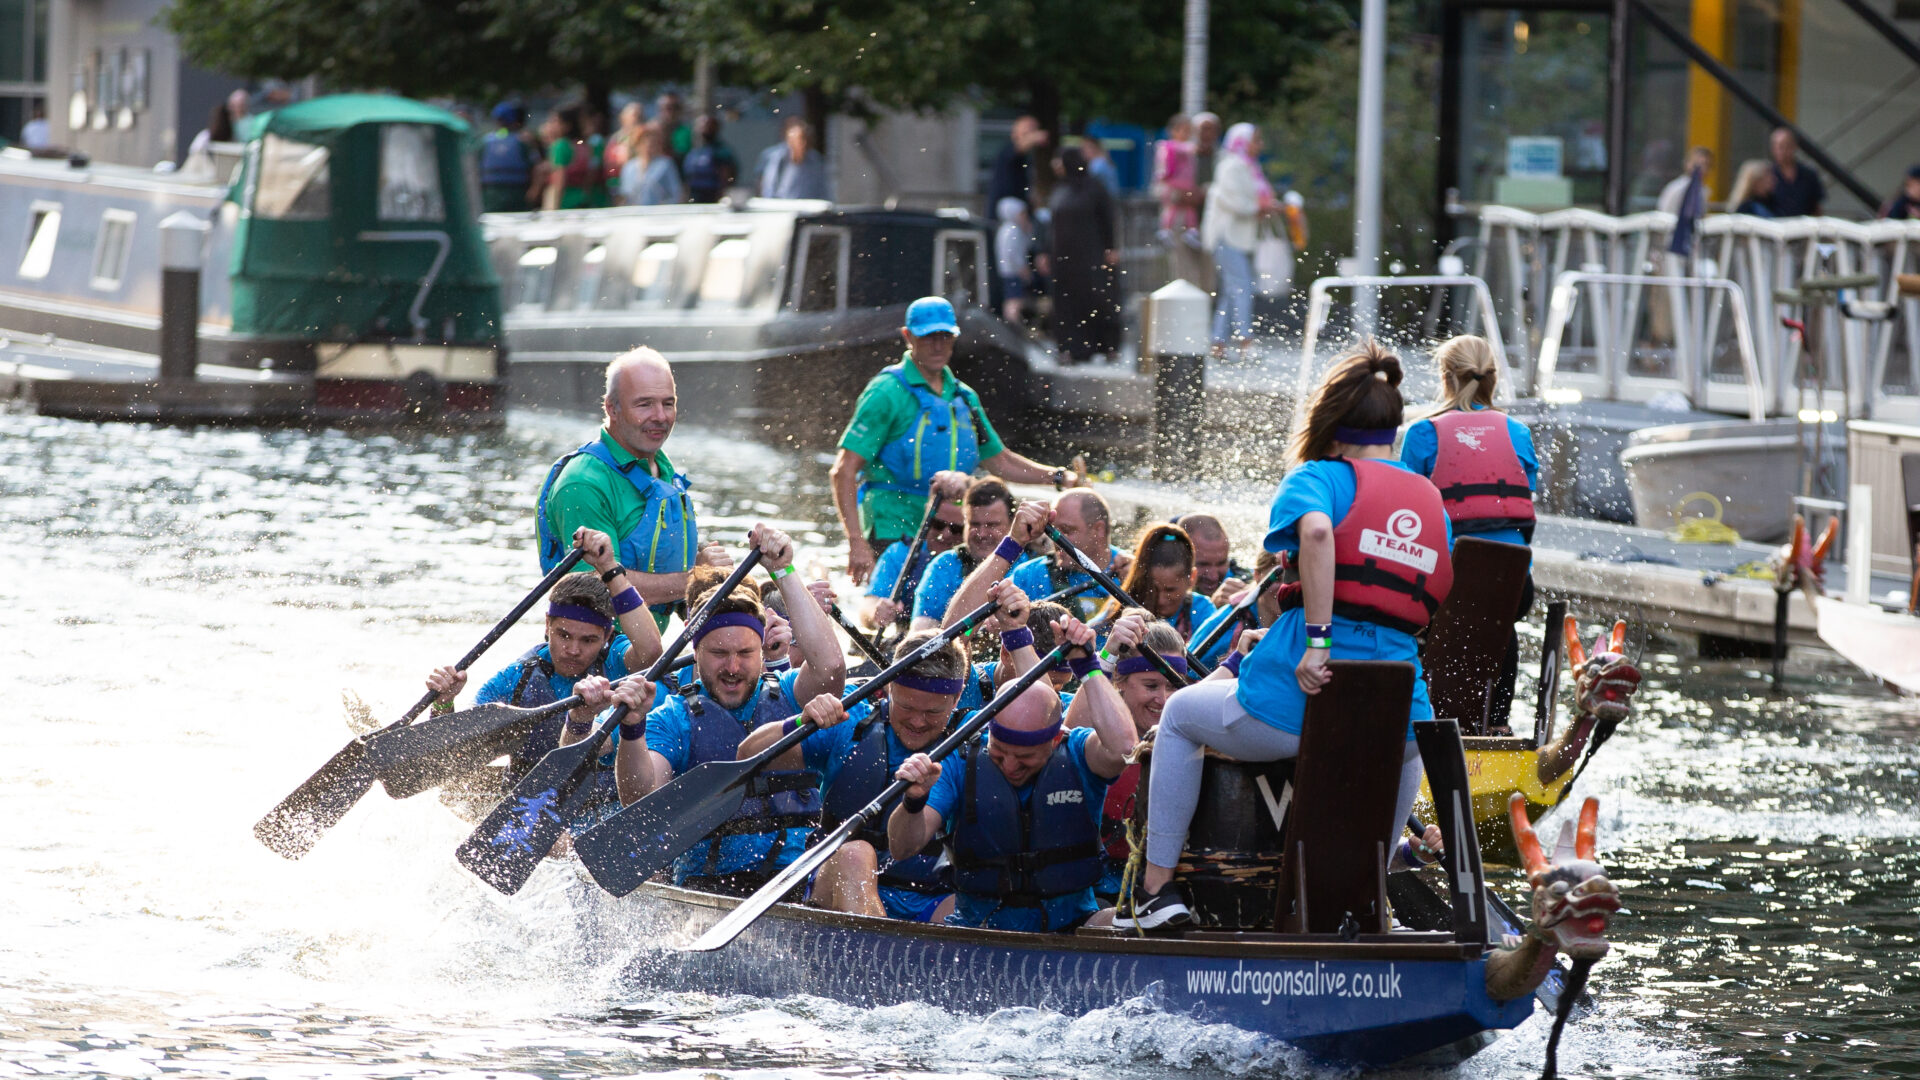 COSMIC Dragon Boat Race at Merchant Square 28th July 2022